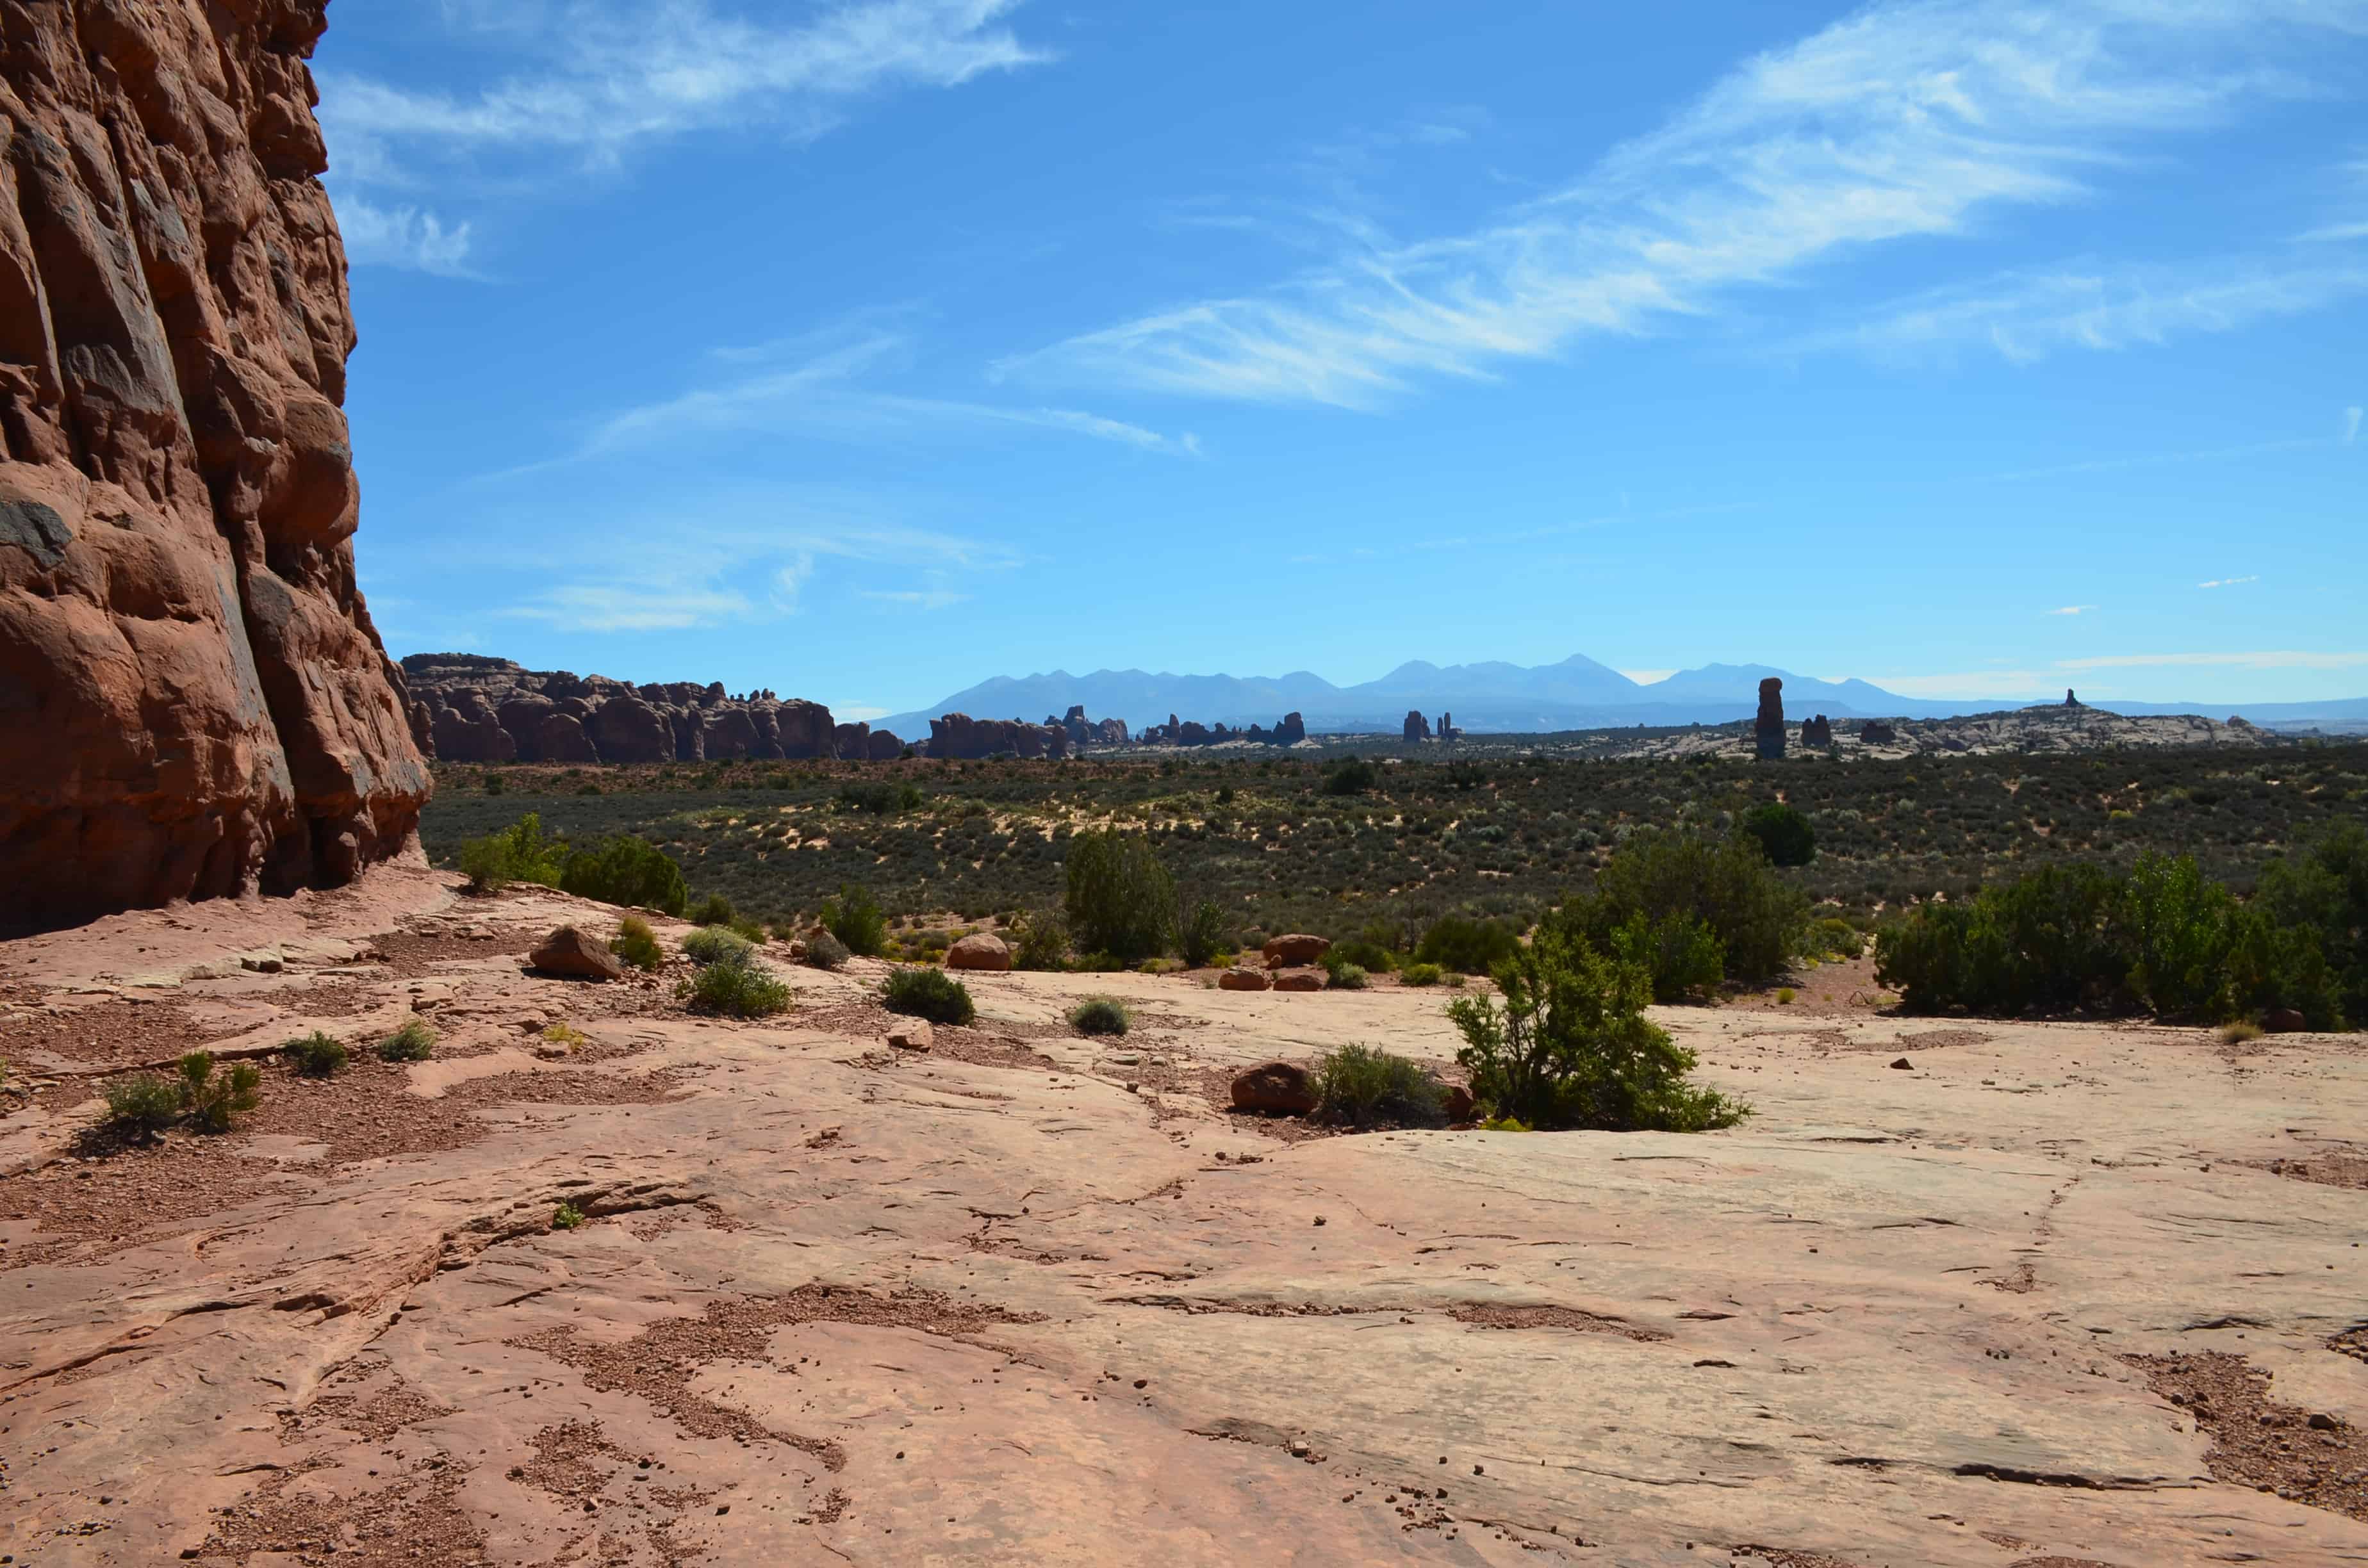 View from Balanced Rock at Arches National Park in Utah